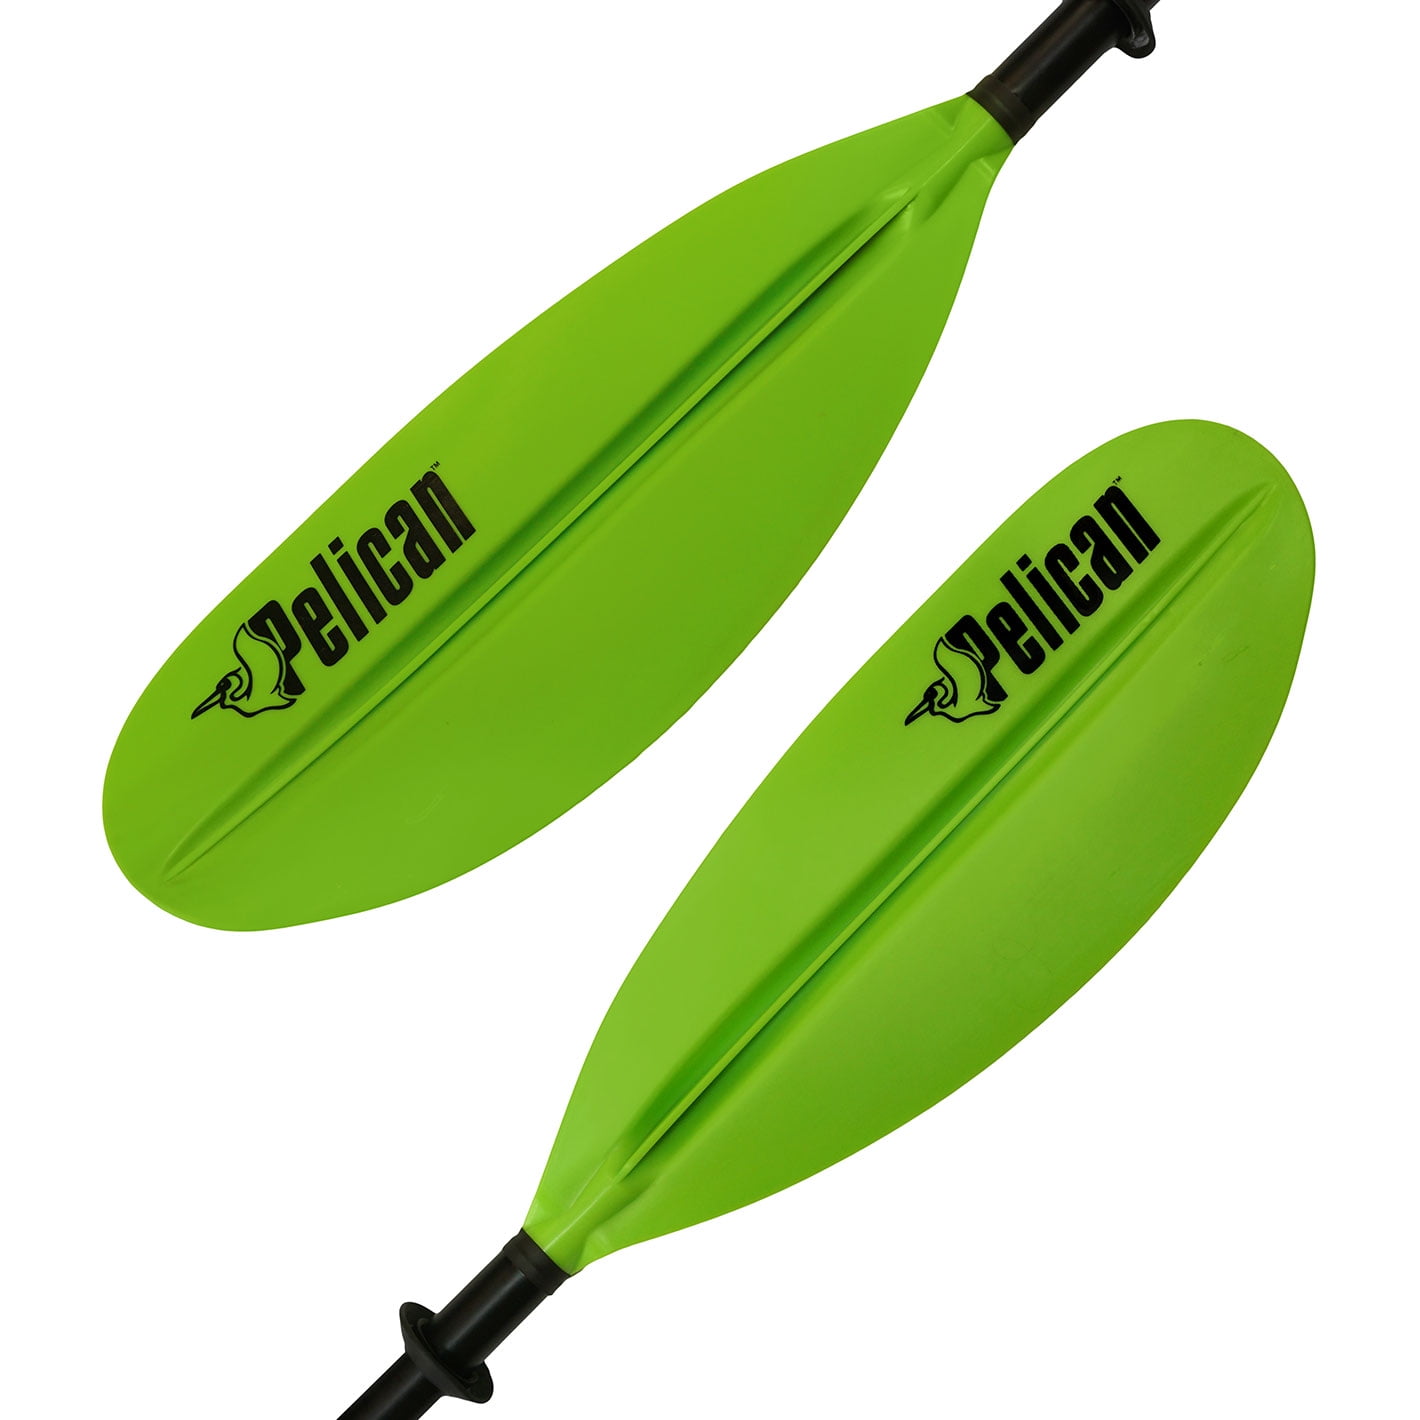 H2o Club 2 part lightweight telescopic paddle with nylon bag 